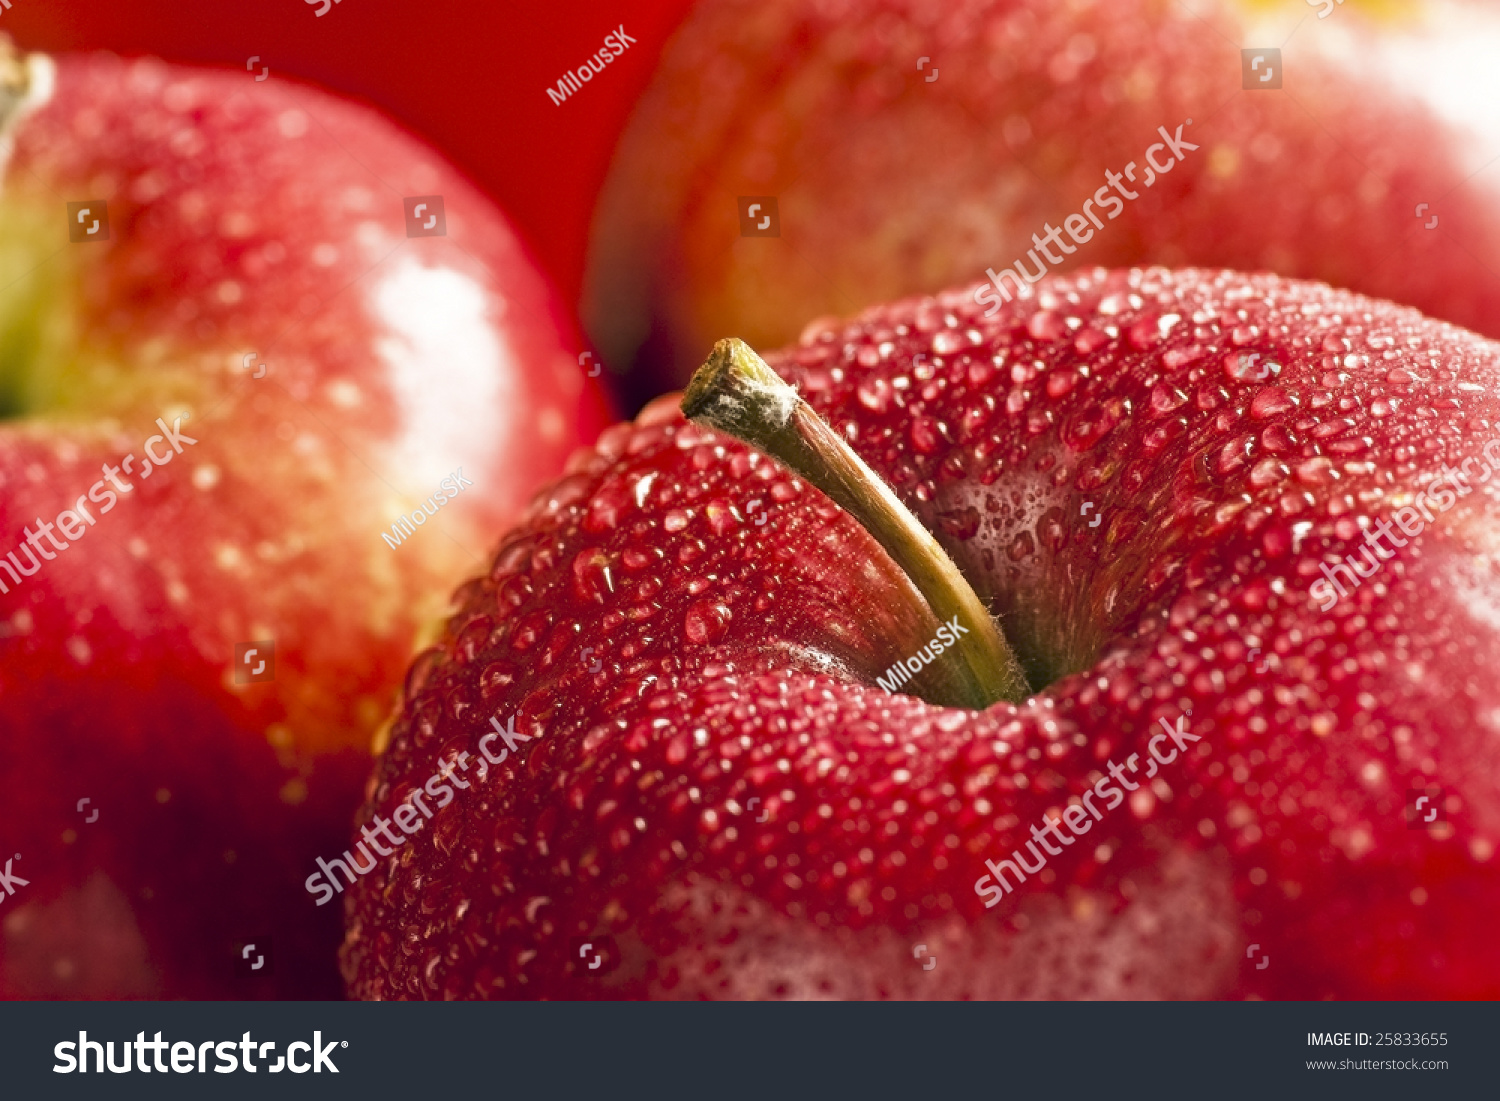 Red apple with water droplets #25833655